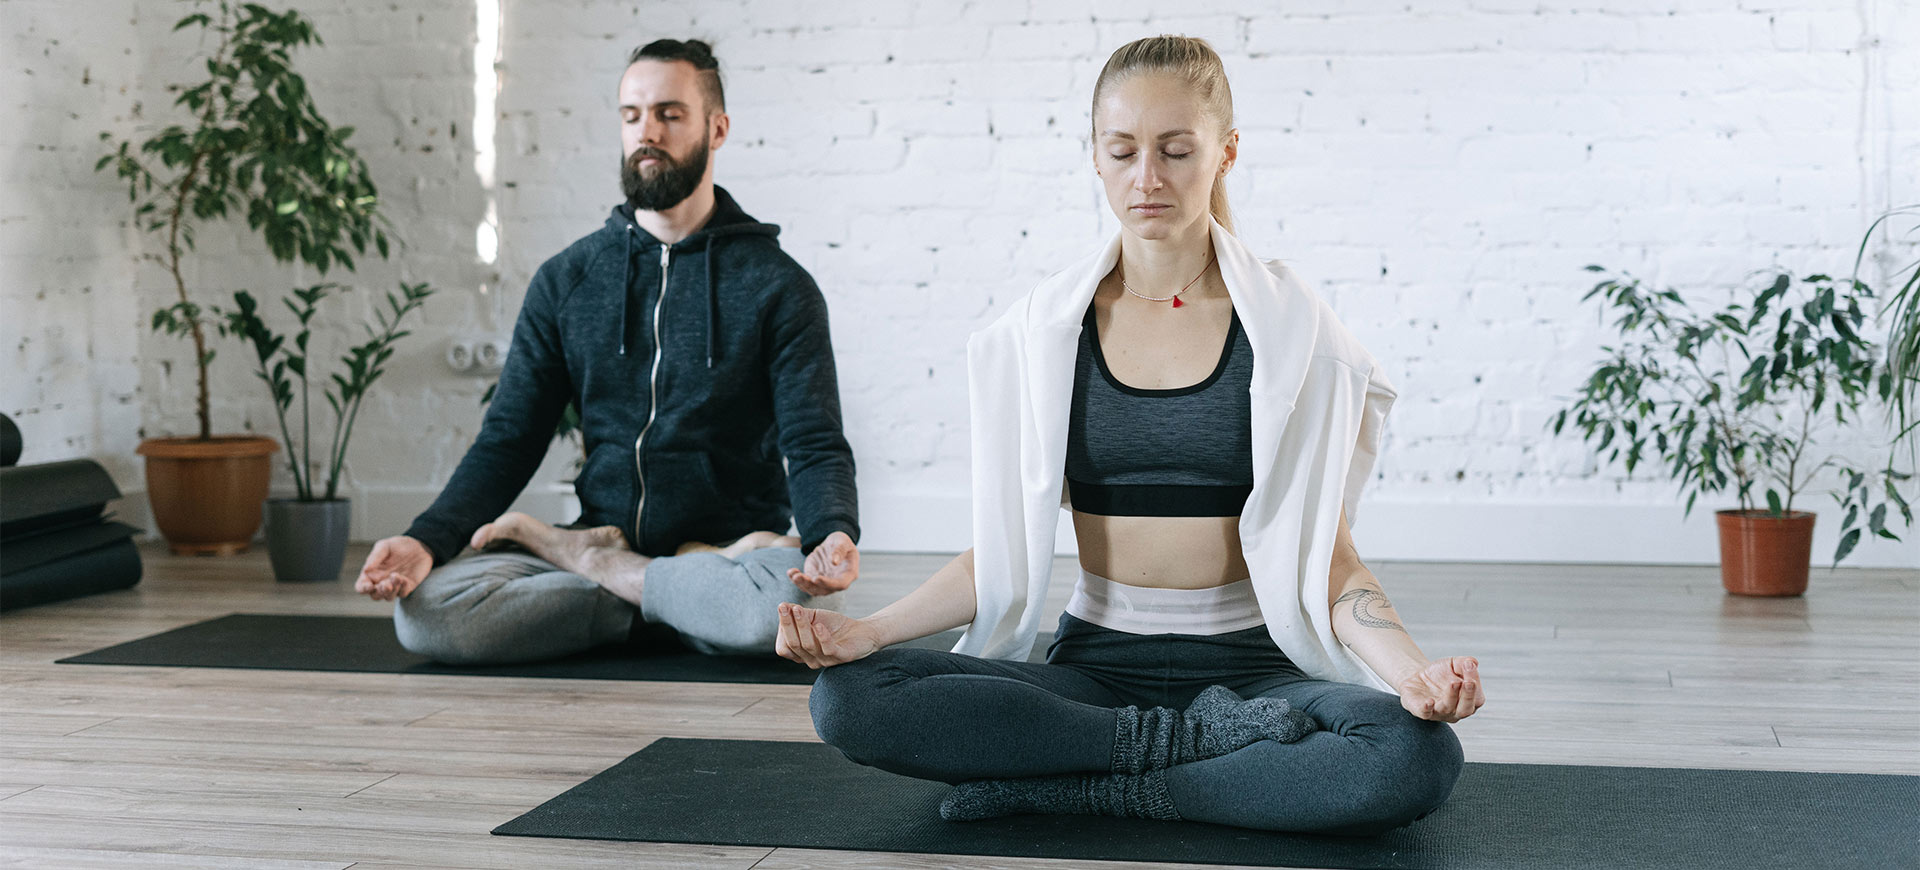 7 Black Meditation, Mindfulness, and Yoga Instructors to Check Out